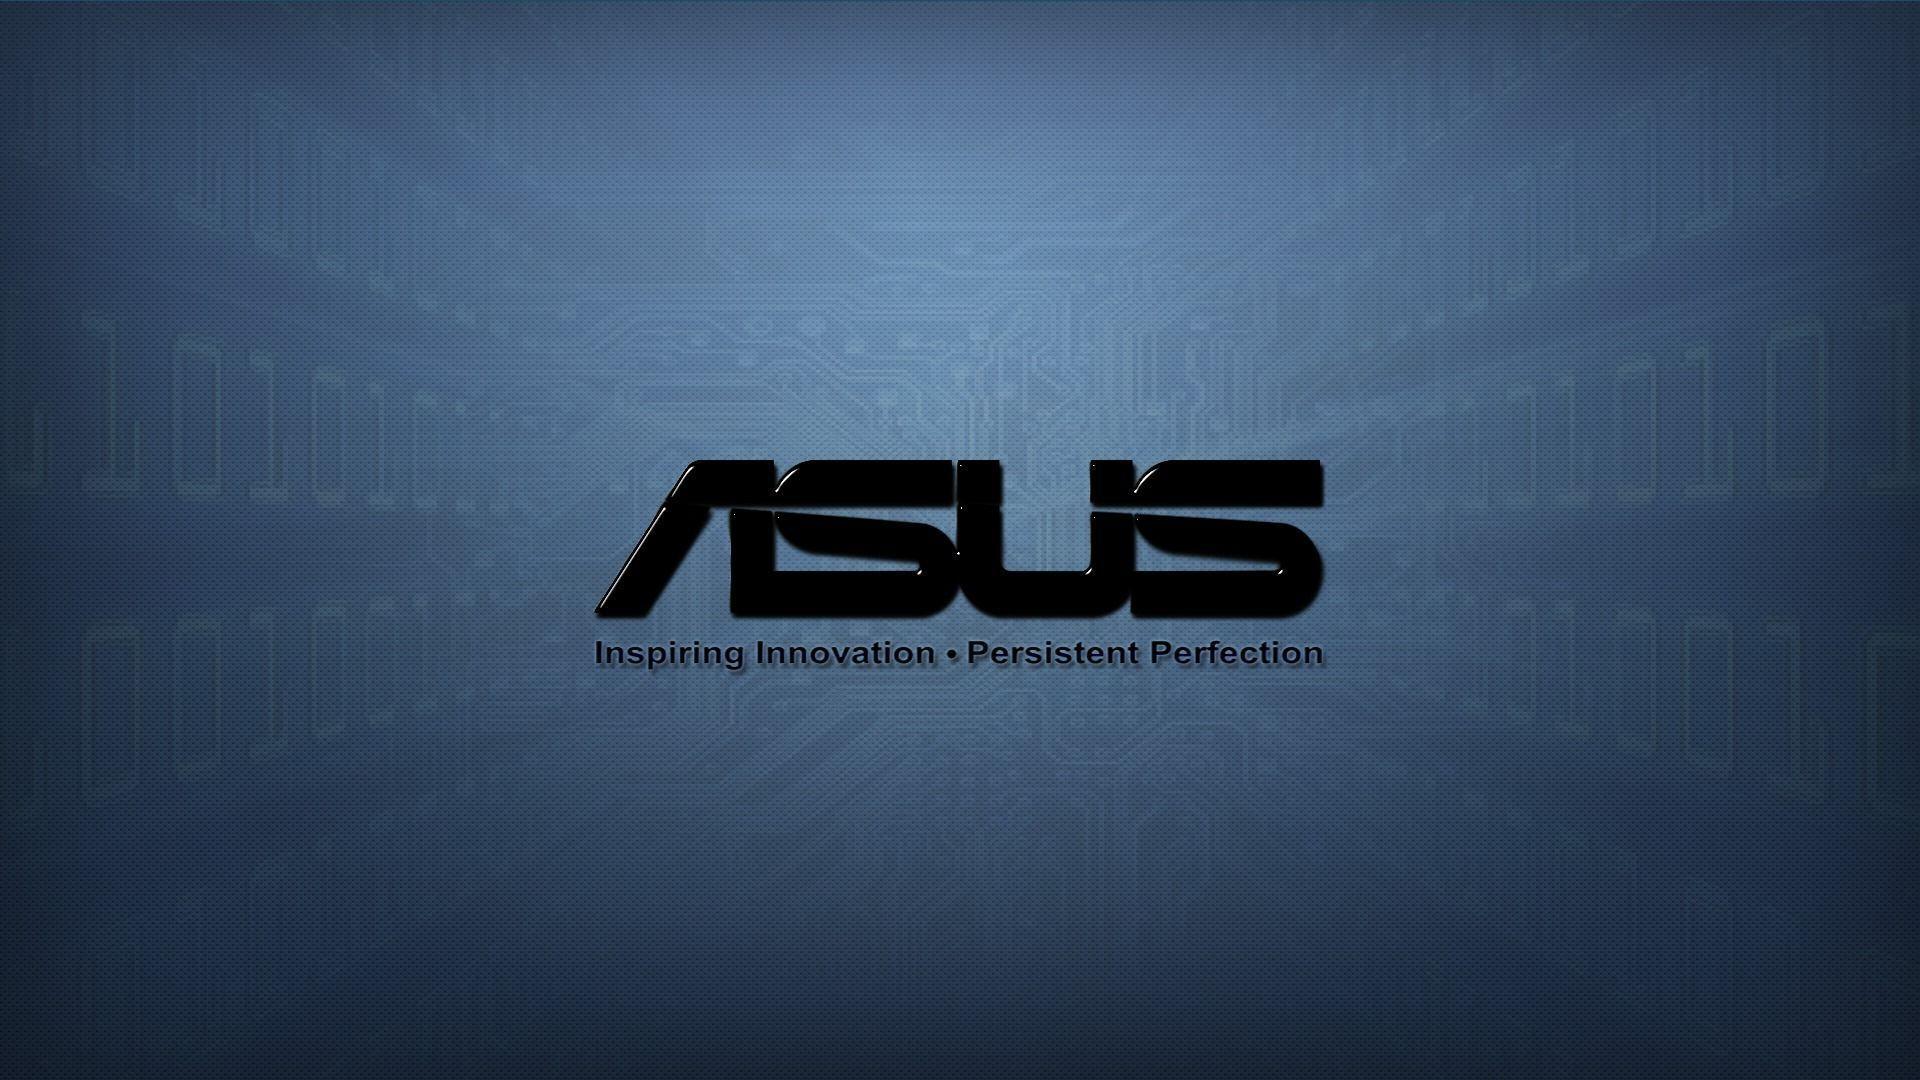 Asus Wallpaper Hd: Related Picture Asus Wallpaper For Windows